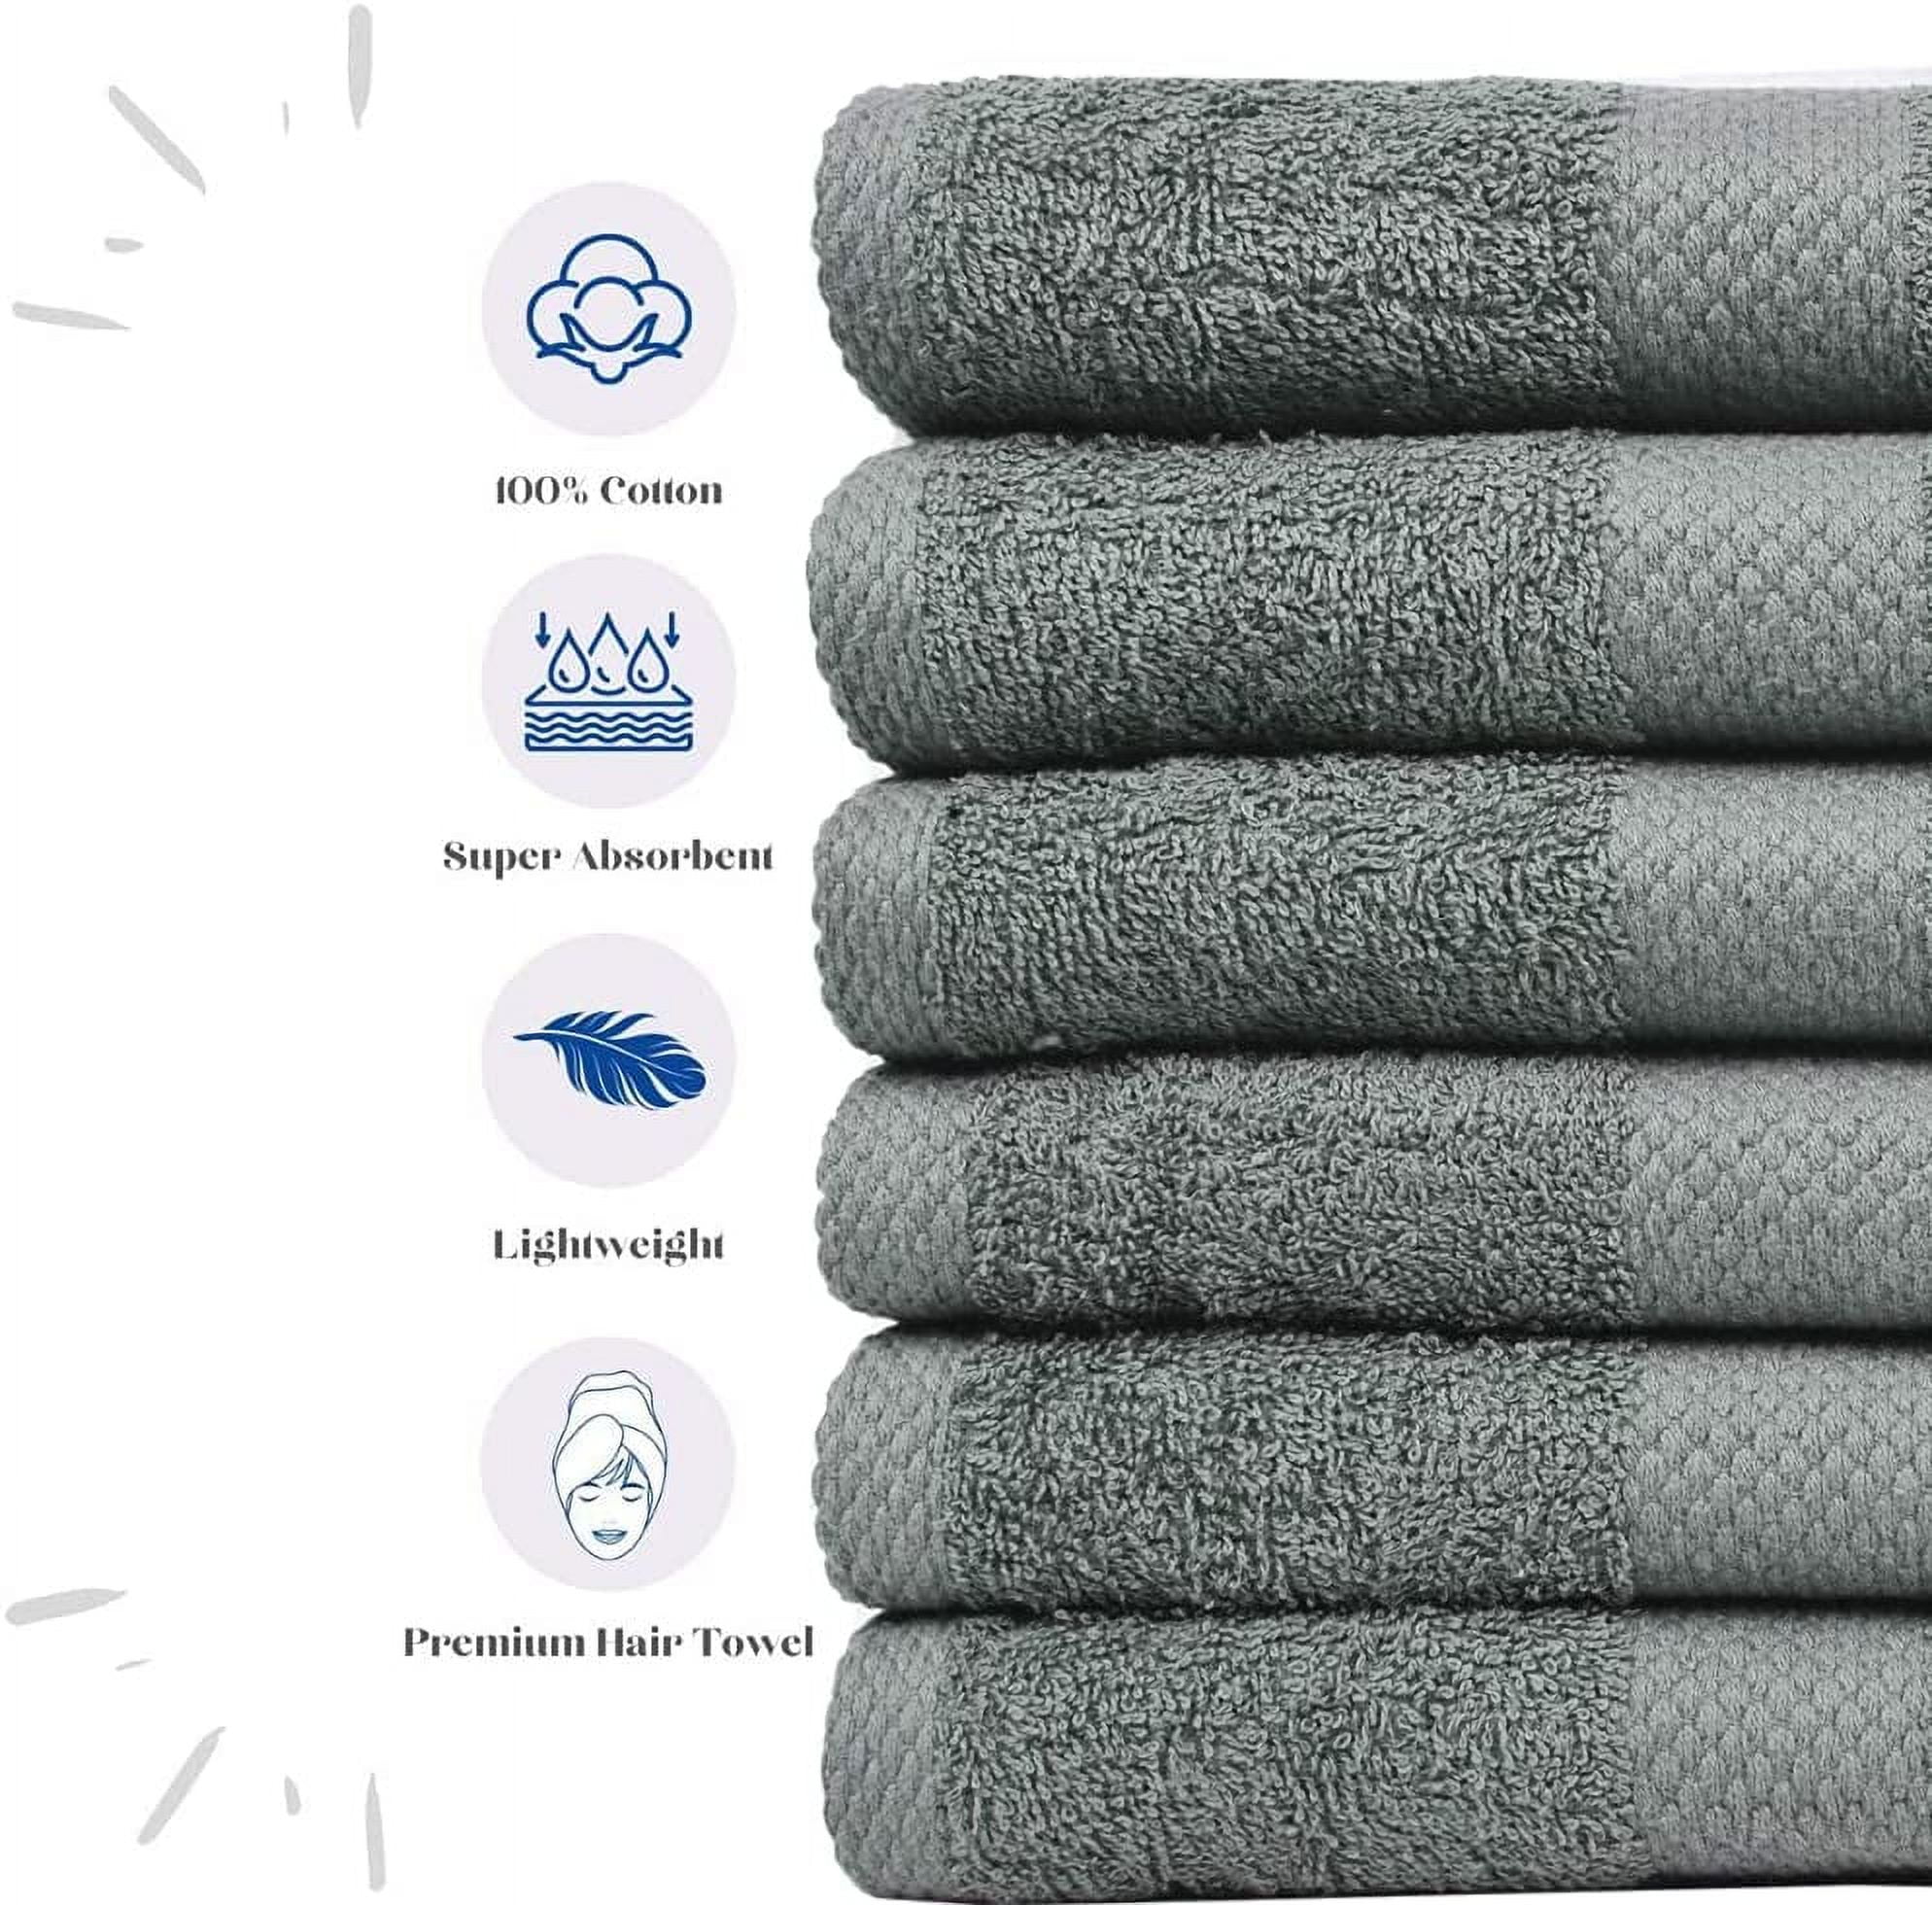 Comfyb on Instagram: Indulge in luxury with our 100% Cotton Cannon Towels!  • available in 12 colors & 5 sizes: 33x33 cm, 41x66 cm, 50x100 cm, 70x140  cm, 88x150 cm. For more